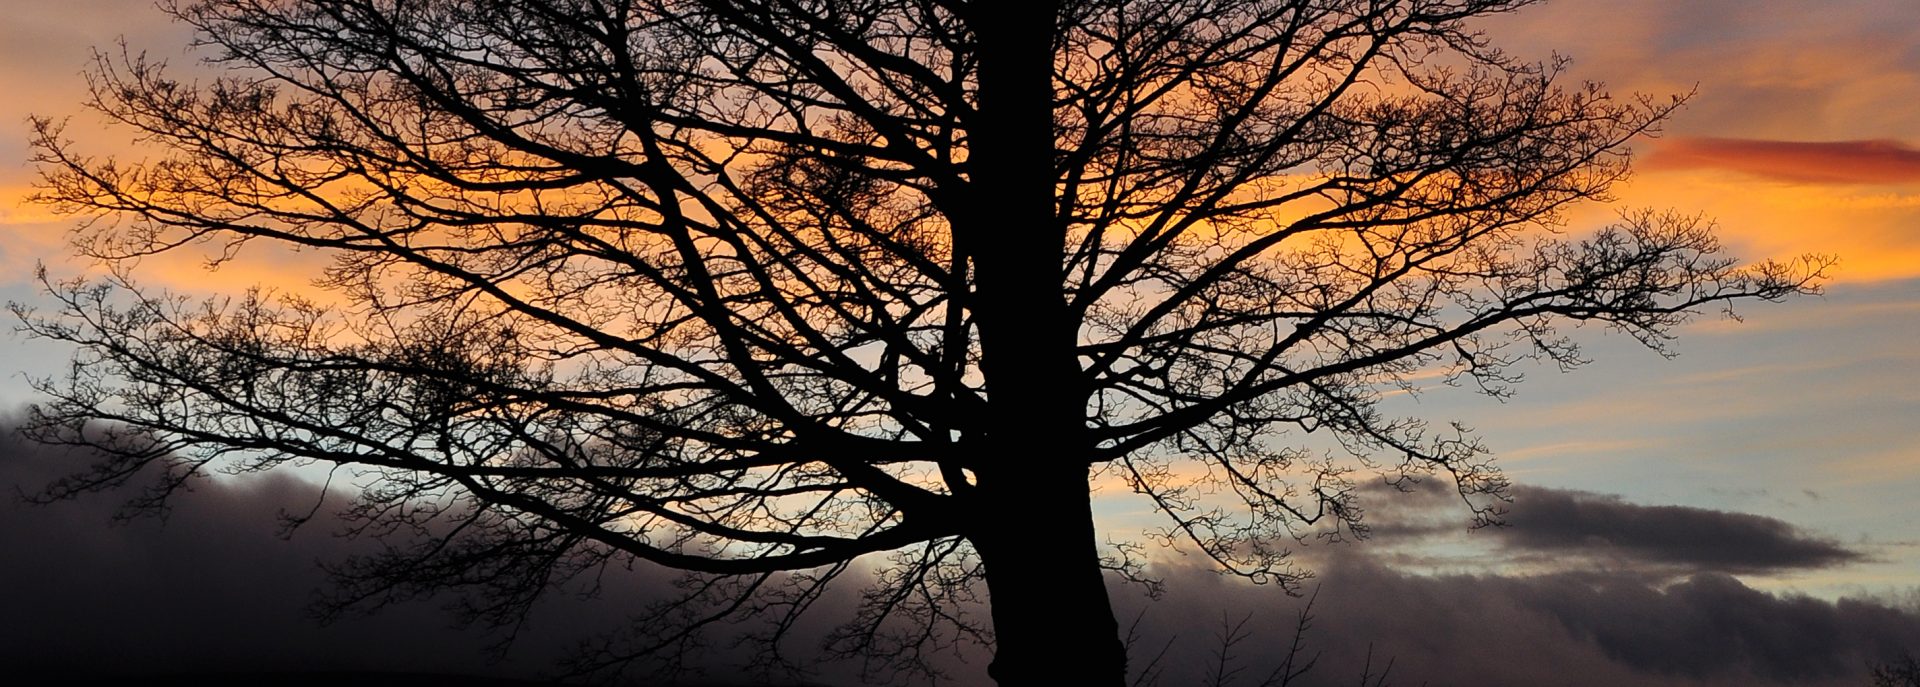 Sunset Tree by thirty5